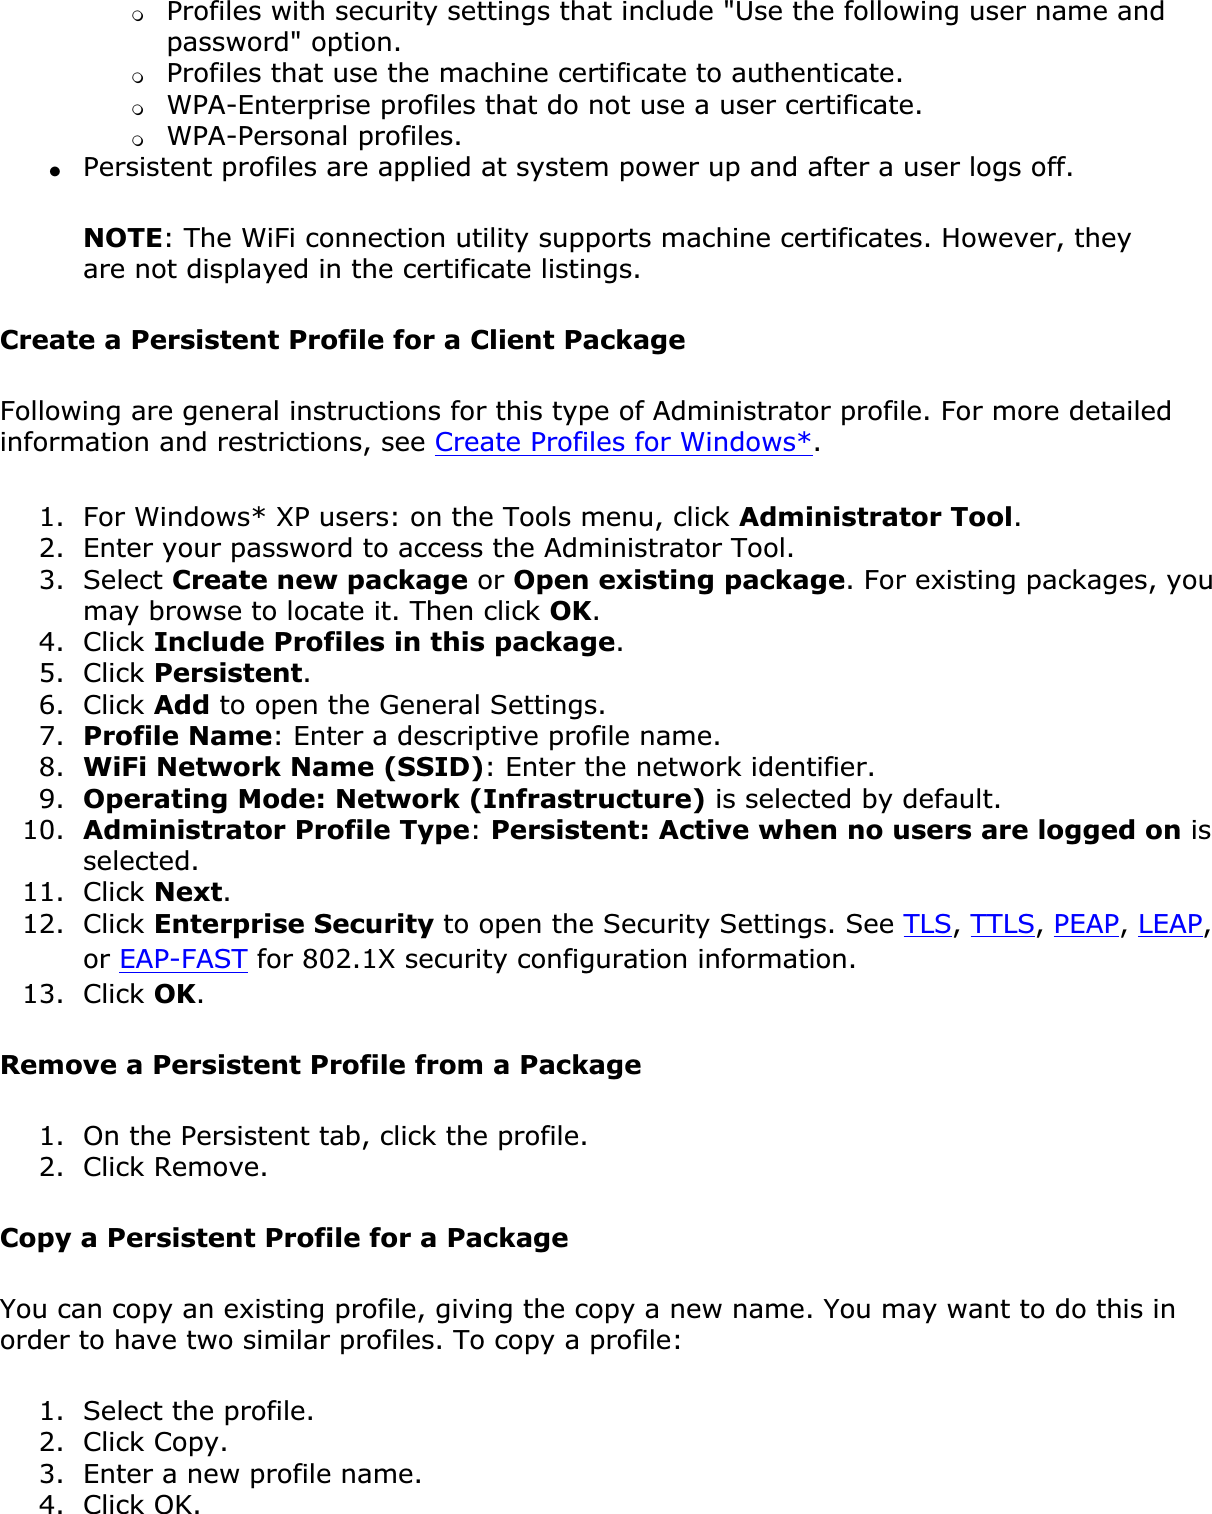 ❍Profiles with security settings that include &quot;Use the following user name and password&quot; option.❍Profiles that use the machine certificate to authenticate.❍WPA-Enterprise profiles that do not use a user certificate.❍WPA-Personal profiles.●Persistent profiles are applied at system power up and after a user logs off.NOTE: The WiFi connection utility supports machine certificates. However, they are not displayed in the certificate listings.Create a Persistent Profile for a Client Package Following are general instructions for this type of Administrator profile. For more detailed information and restrictions, see Create Profiles for Windows*.1. For Windows* XP users: on the Tools menu, click Administrator Tool.2. Enter your password to access the Administrator Tool.3. Select Create new package or Open existing package. For existing packages, you may browse to locate it. Then click OK.4. Click Include Profiles in this package.5. Click Persistent.6. Click Add to open the General Settings.7. Profile Name: Enter a descriptive profile name.8. WiFi Network Name (SSID): Enter the network identifier.9. Operating Mode: Network (Infrastructure) is selected by default.10. Administrator Profile Type:Persistent: Active when no users are logged on is selected.11. Click Next.12. Click Enterprise Security to open the Security Settings. See TLS,TTLS,PEAP,LEAP,or EAP-FAST for 802.1X security configuration information.13. Click OK.Remove a Persistent Profile from a Package1. On the Persistent tab, click the profile.2. Click Remove.Copy a Persistent Profile for a PackageYou can copy an existing profile, giving the copy a new name. You may want to do this in order to have two similar profiles. To copy a profile:1. Select the profile.2. Click Copy.3. Enter a new profile name.4. Click OK.